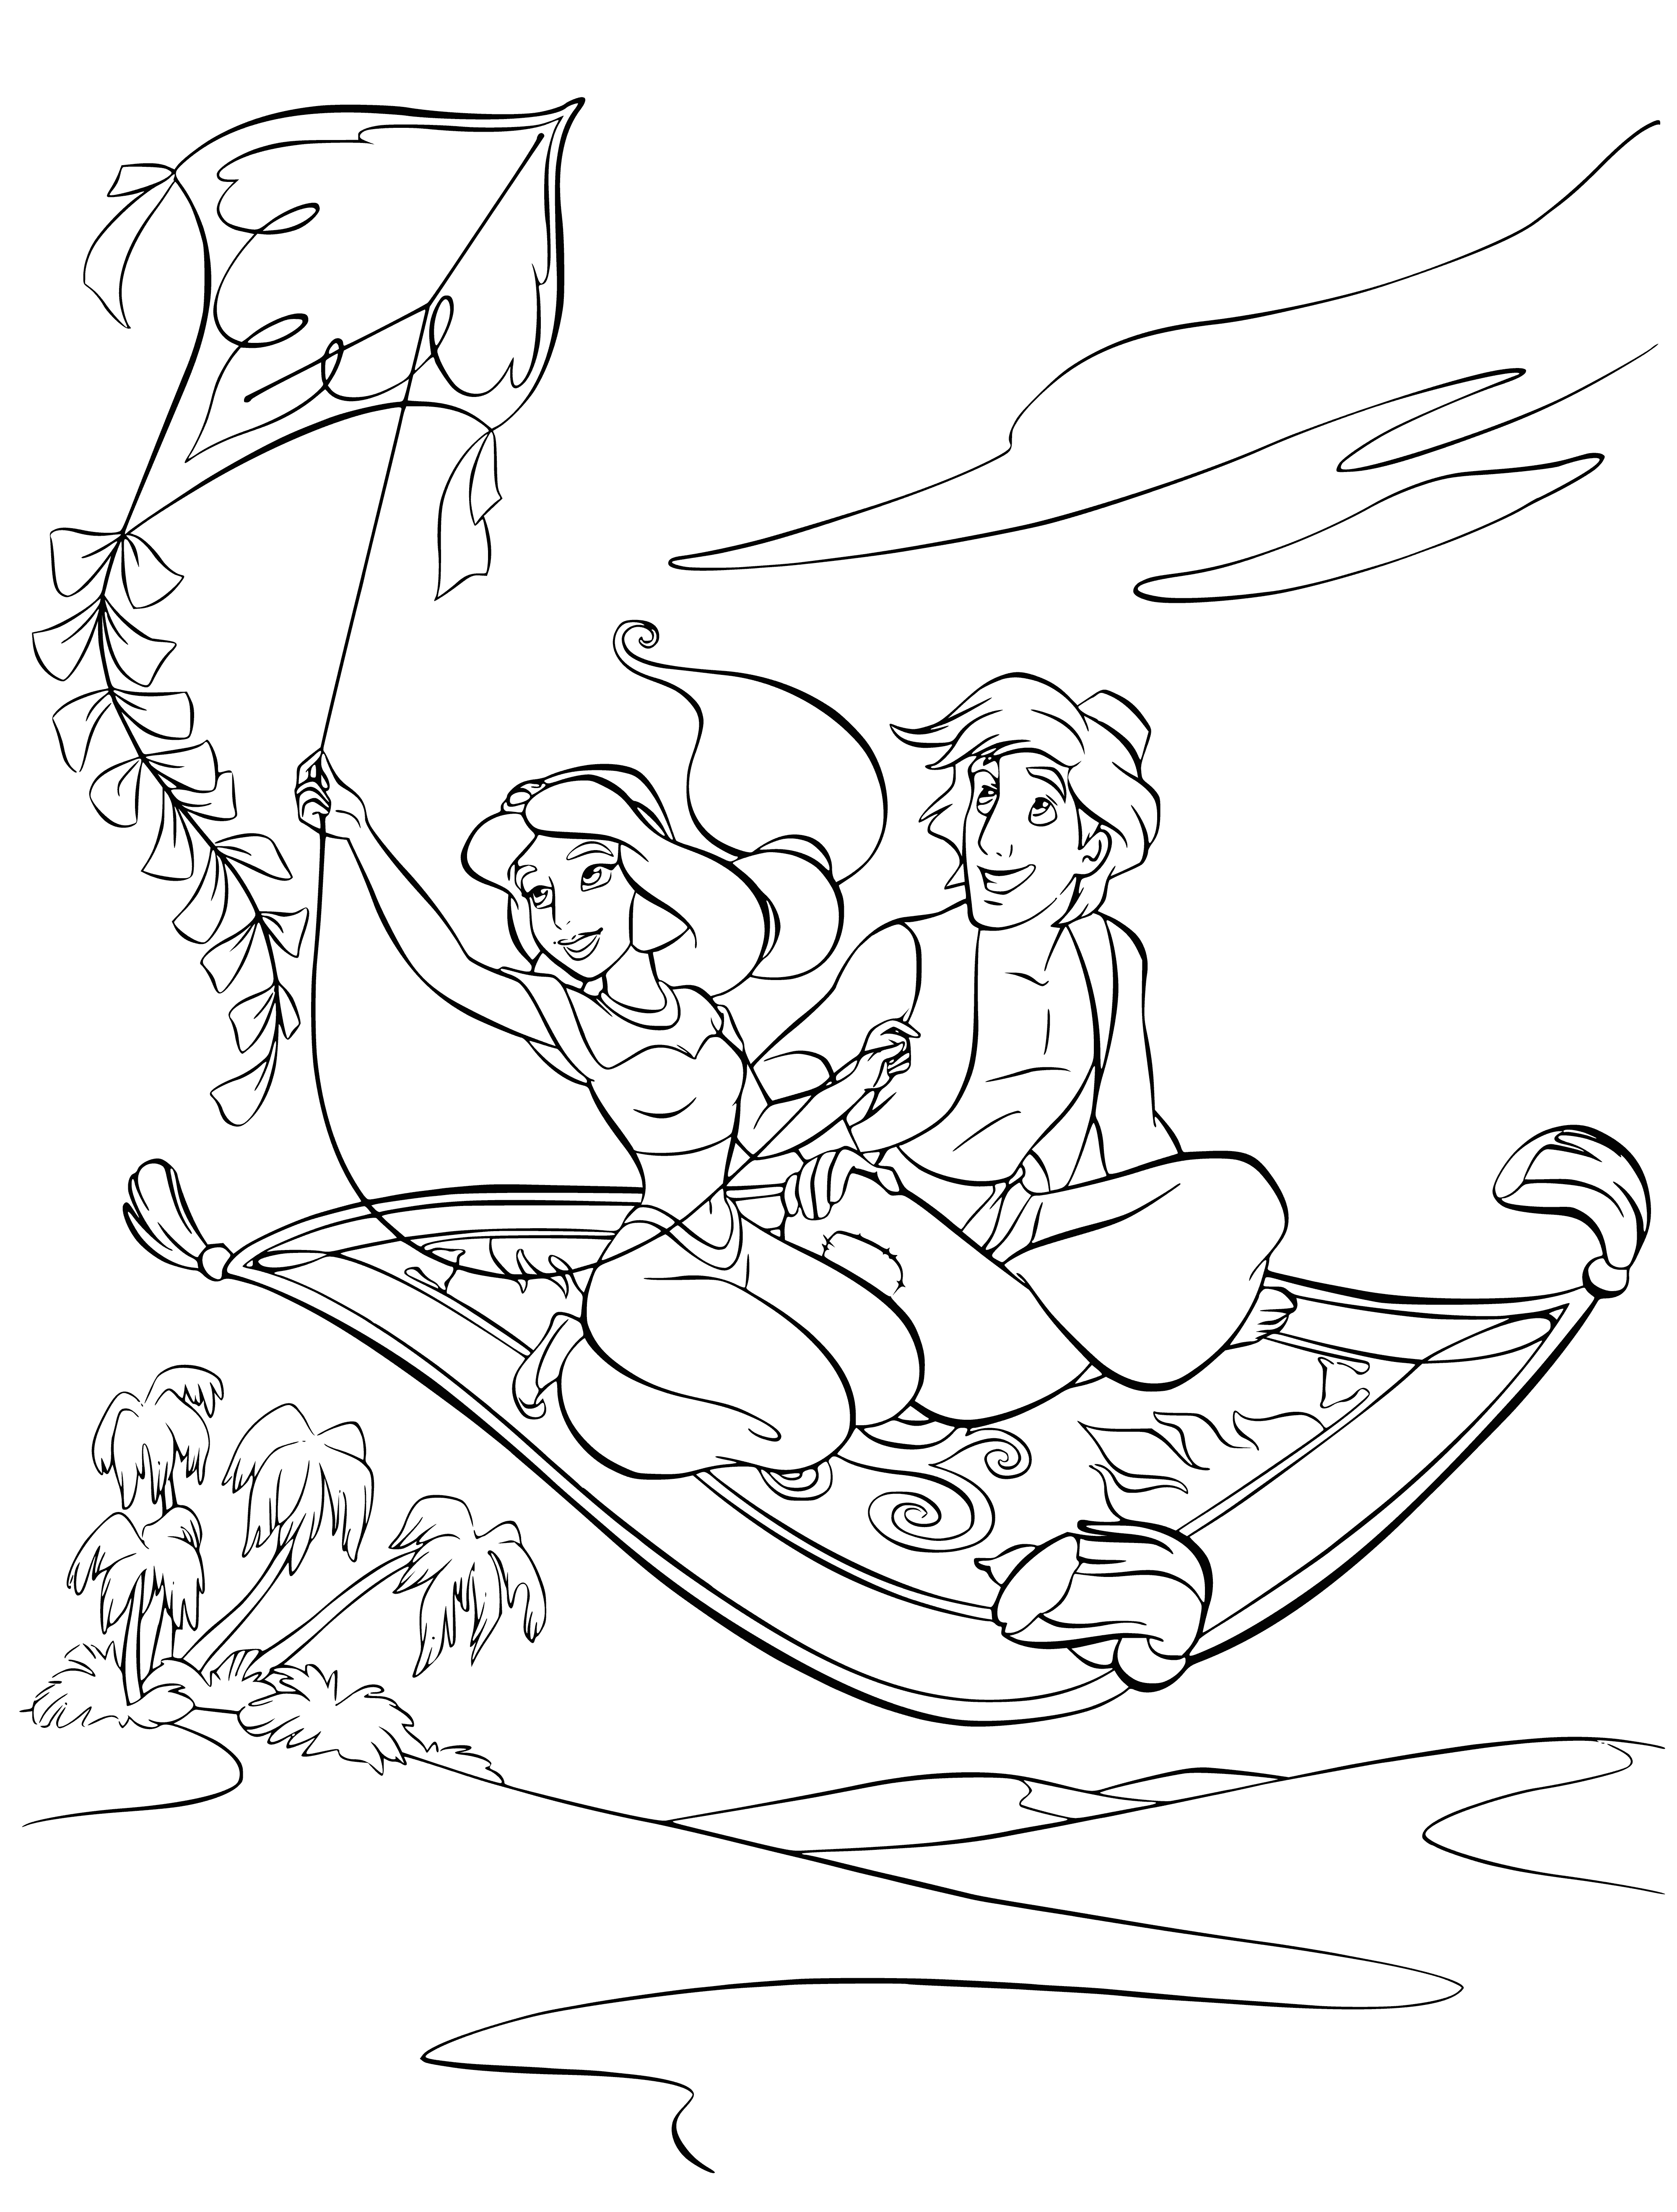 coloring page: Jasmine and Aladdin chat on a Flying Carpet while Jasmine holds a lantern.